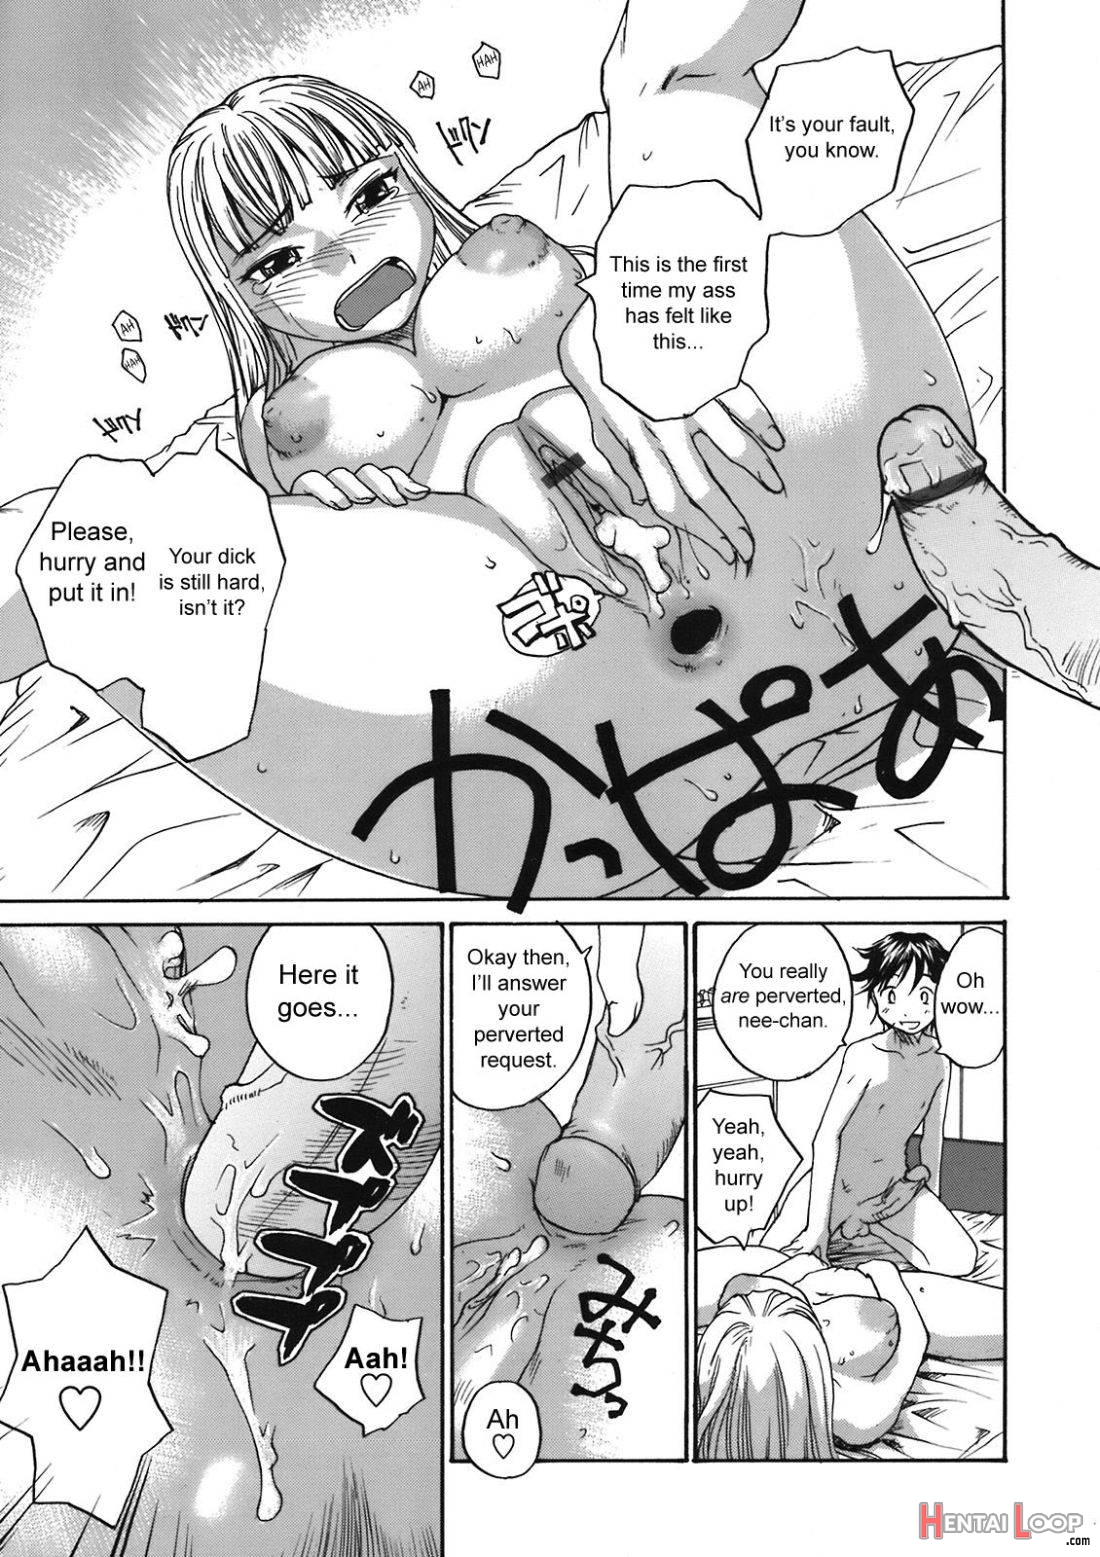 Back to Nee-chan page 13